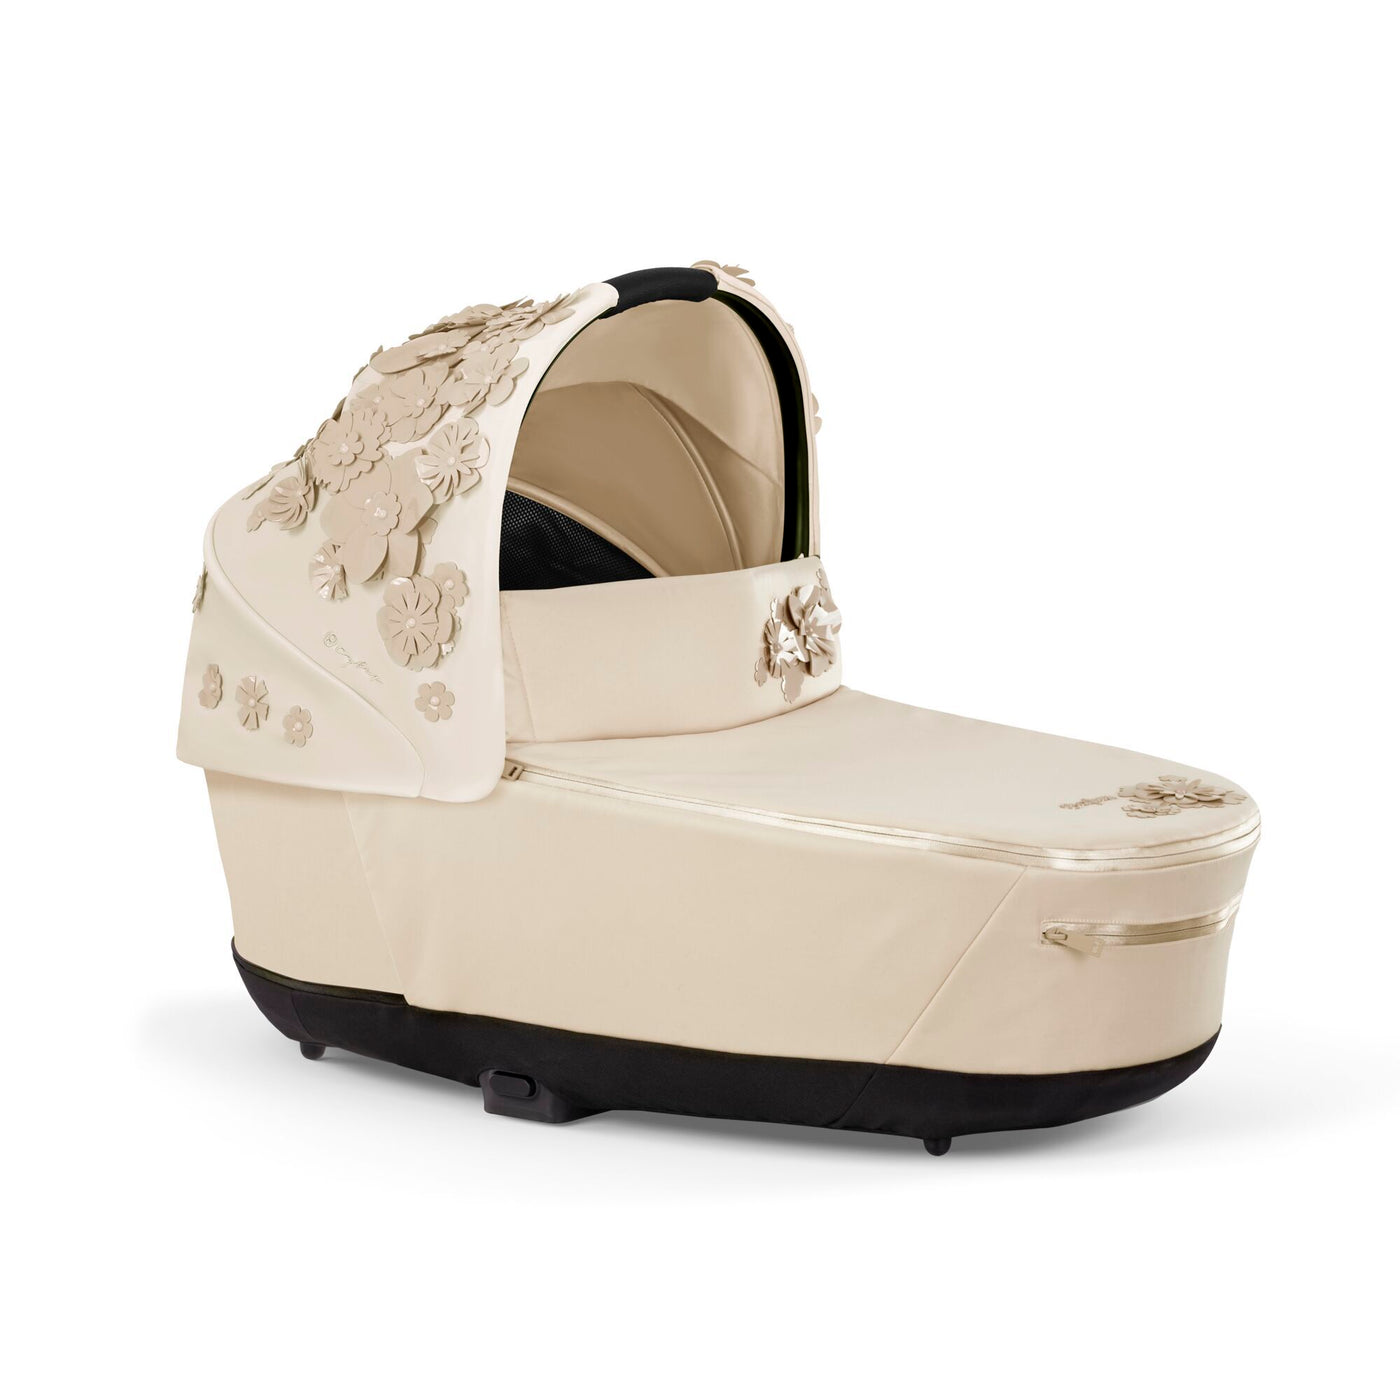 Cybex Priam Lux CarryCot - Simply Flowers Beige